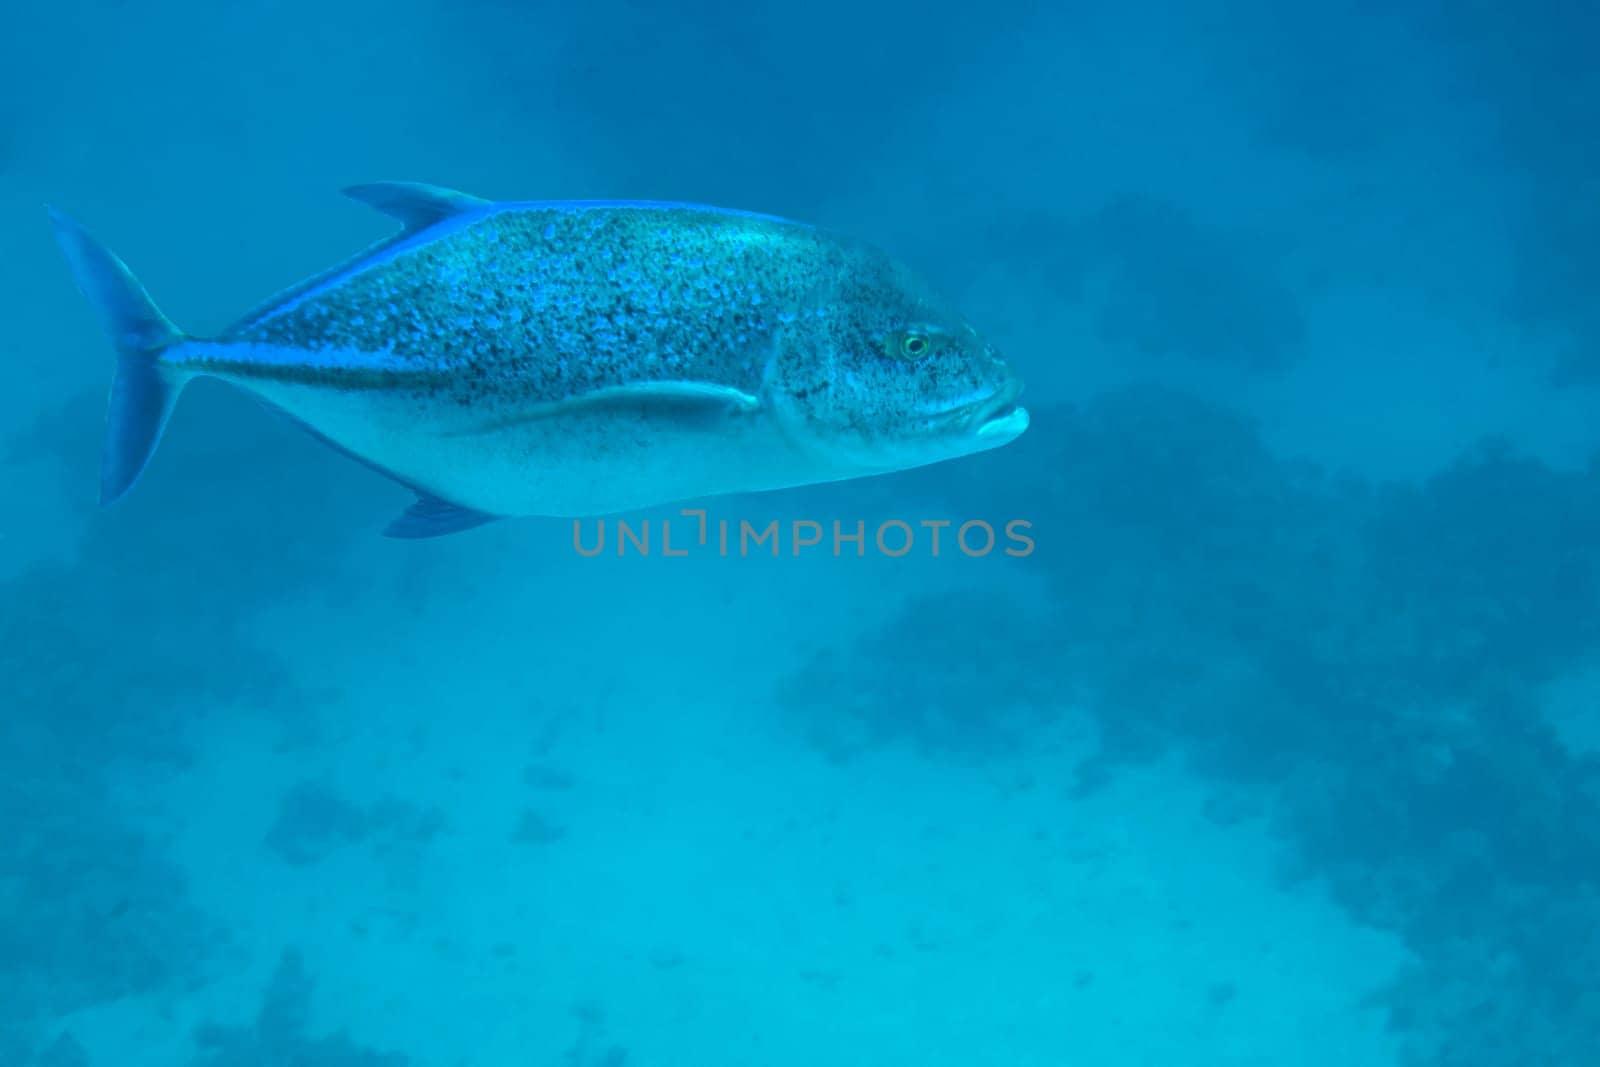 Giant trevally floating in the depths with glare of light, underwater life